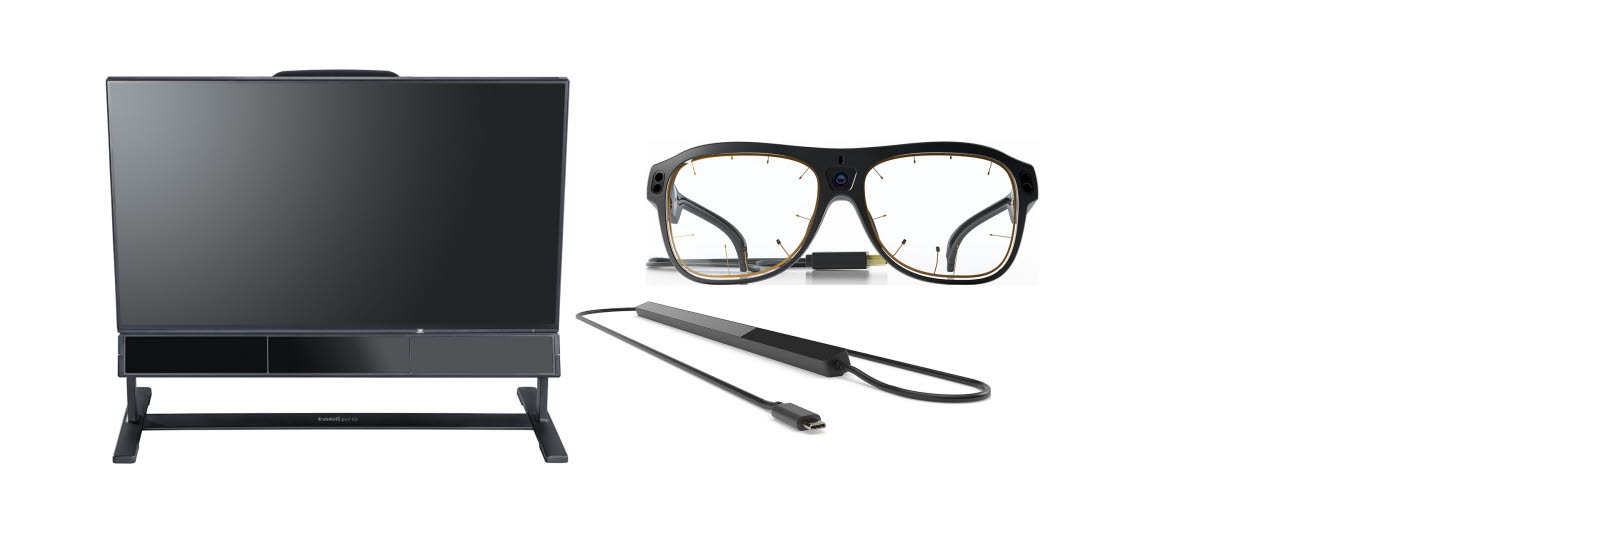 Tobii Pro products Fusion, Spectrum and Glasses 3